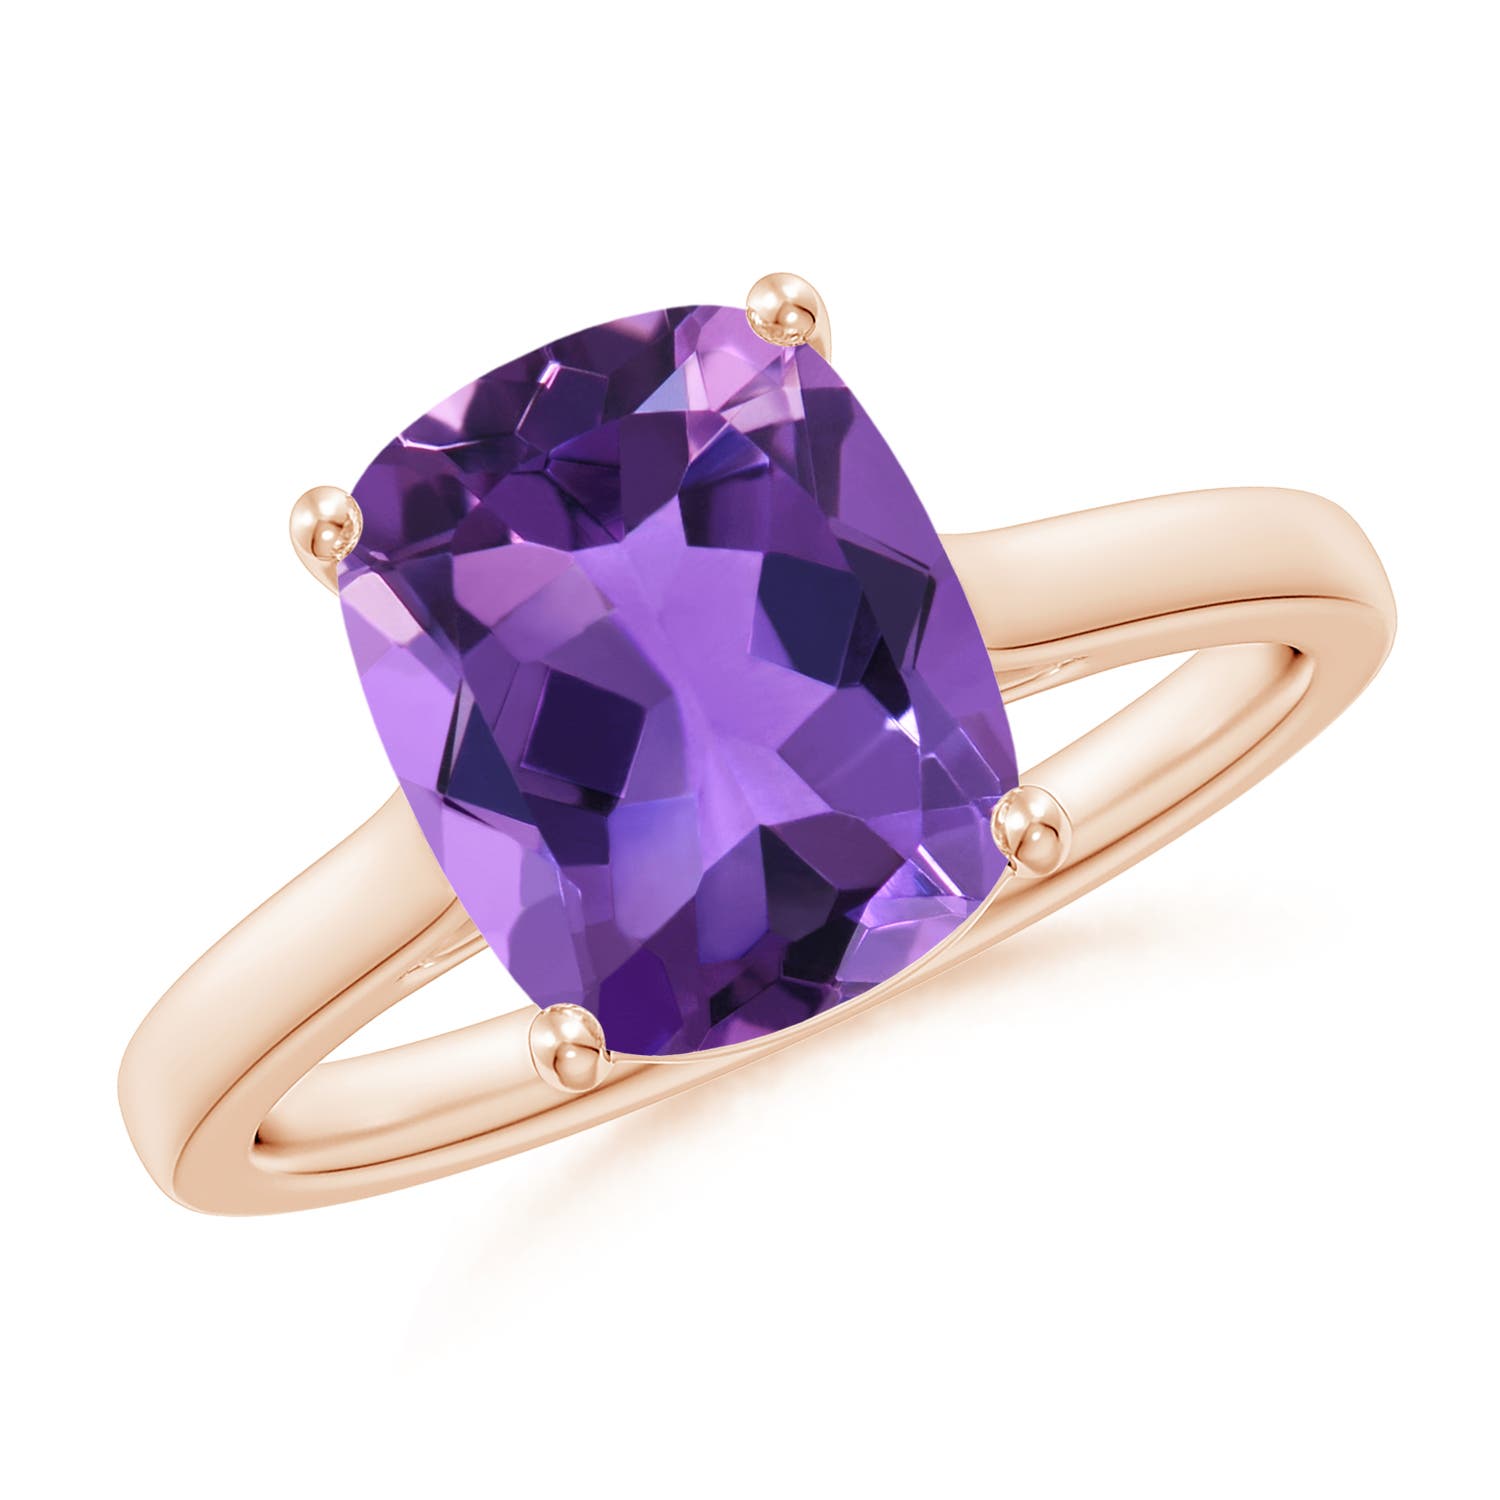 AAA - Amethyst / 2.72 CT / 14 KT Rose Gold